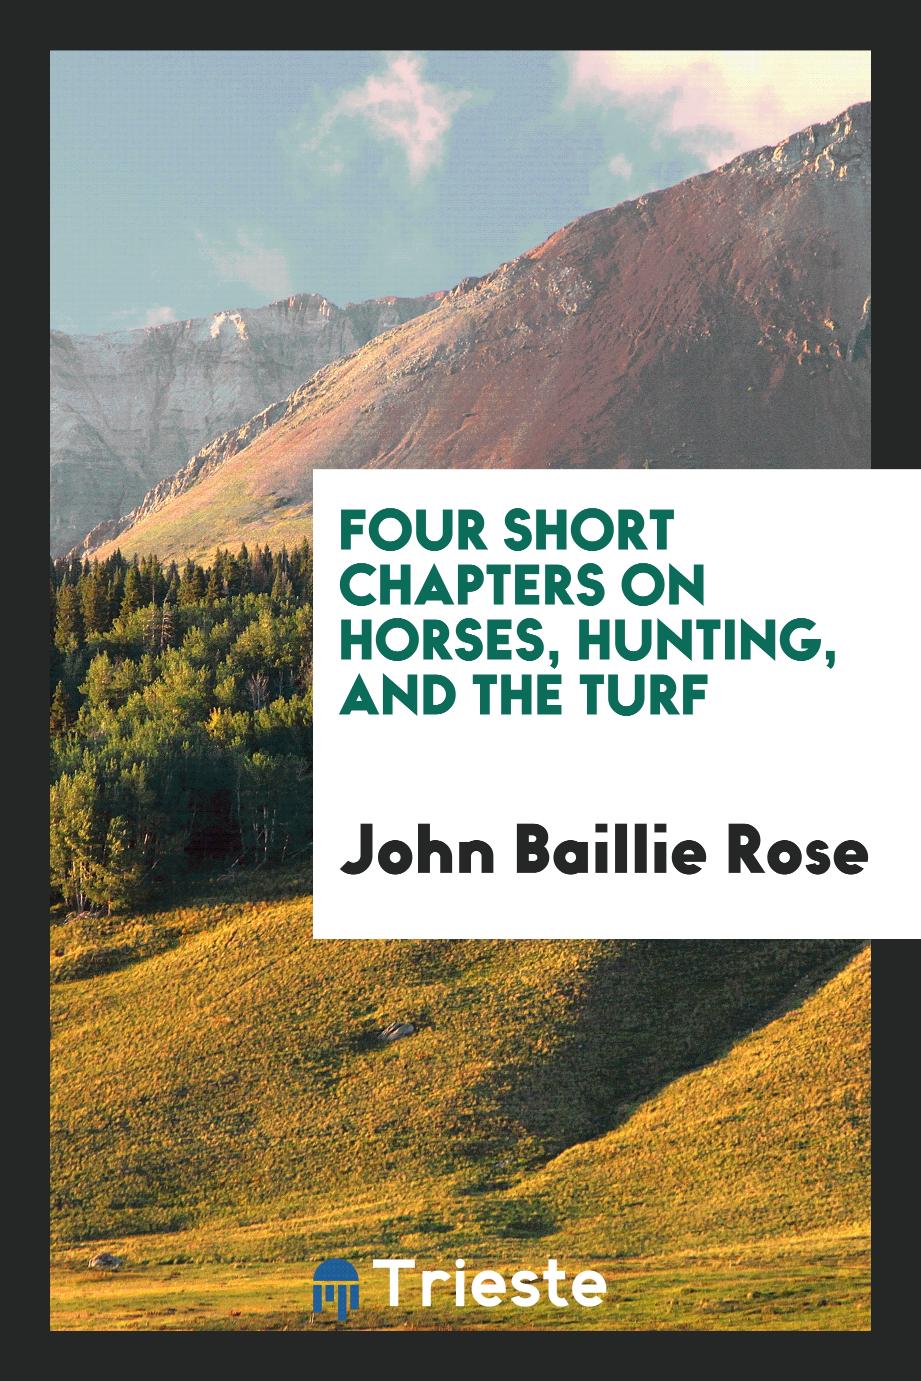 Four short chapters on horses, hunting, and the turf